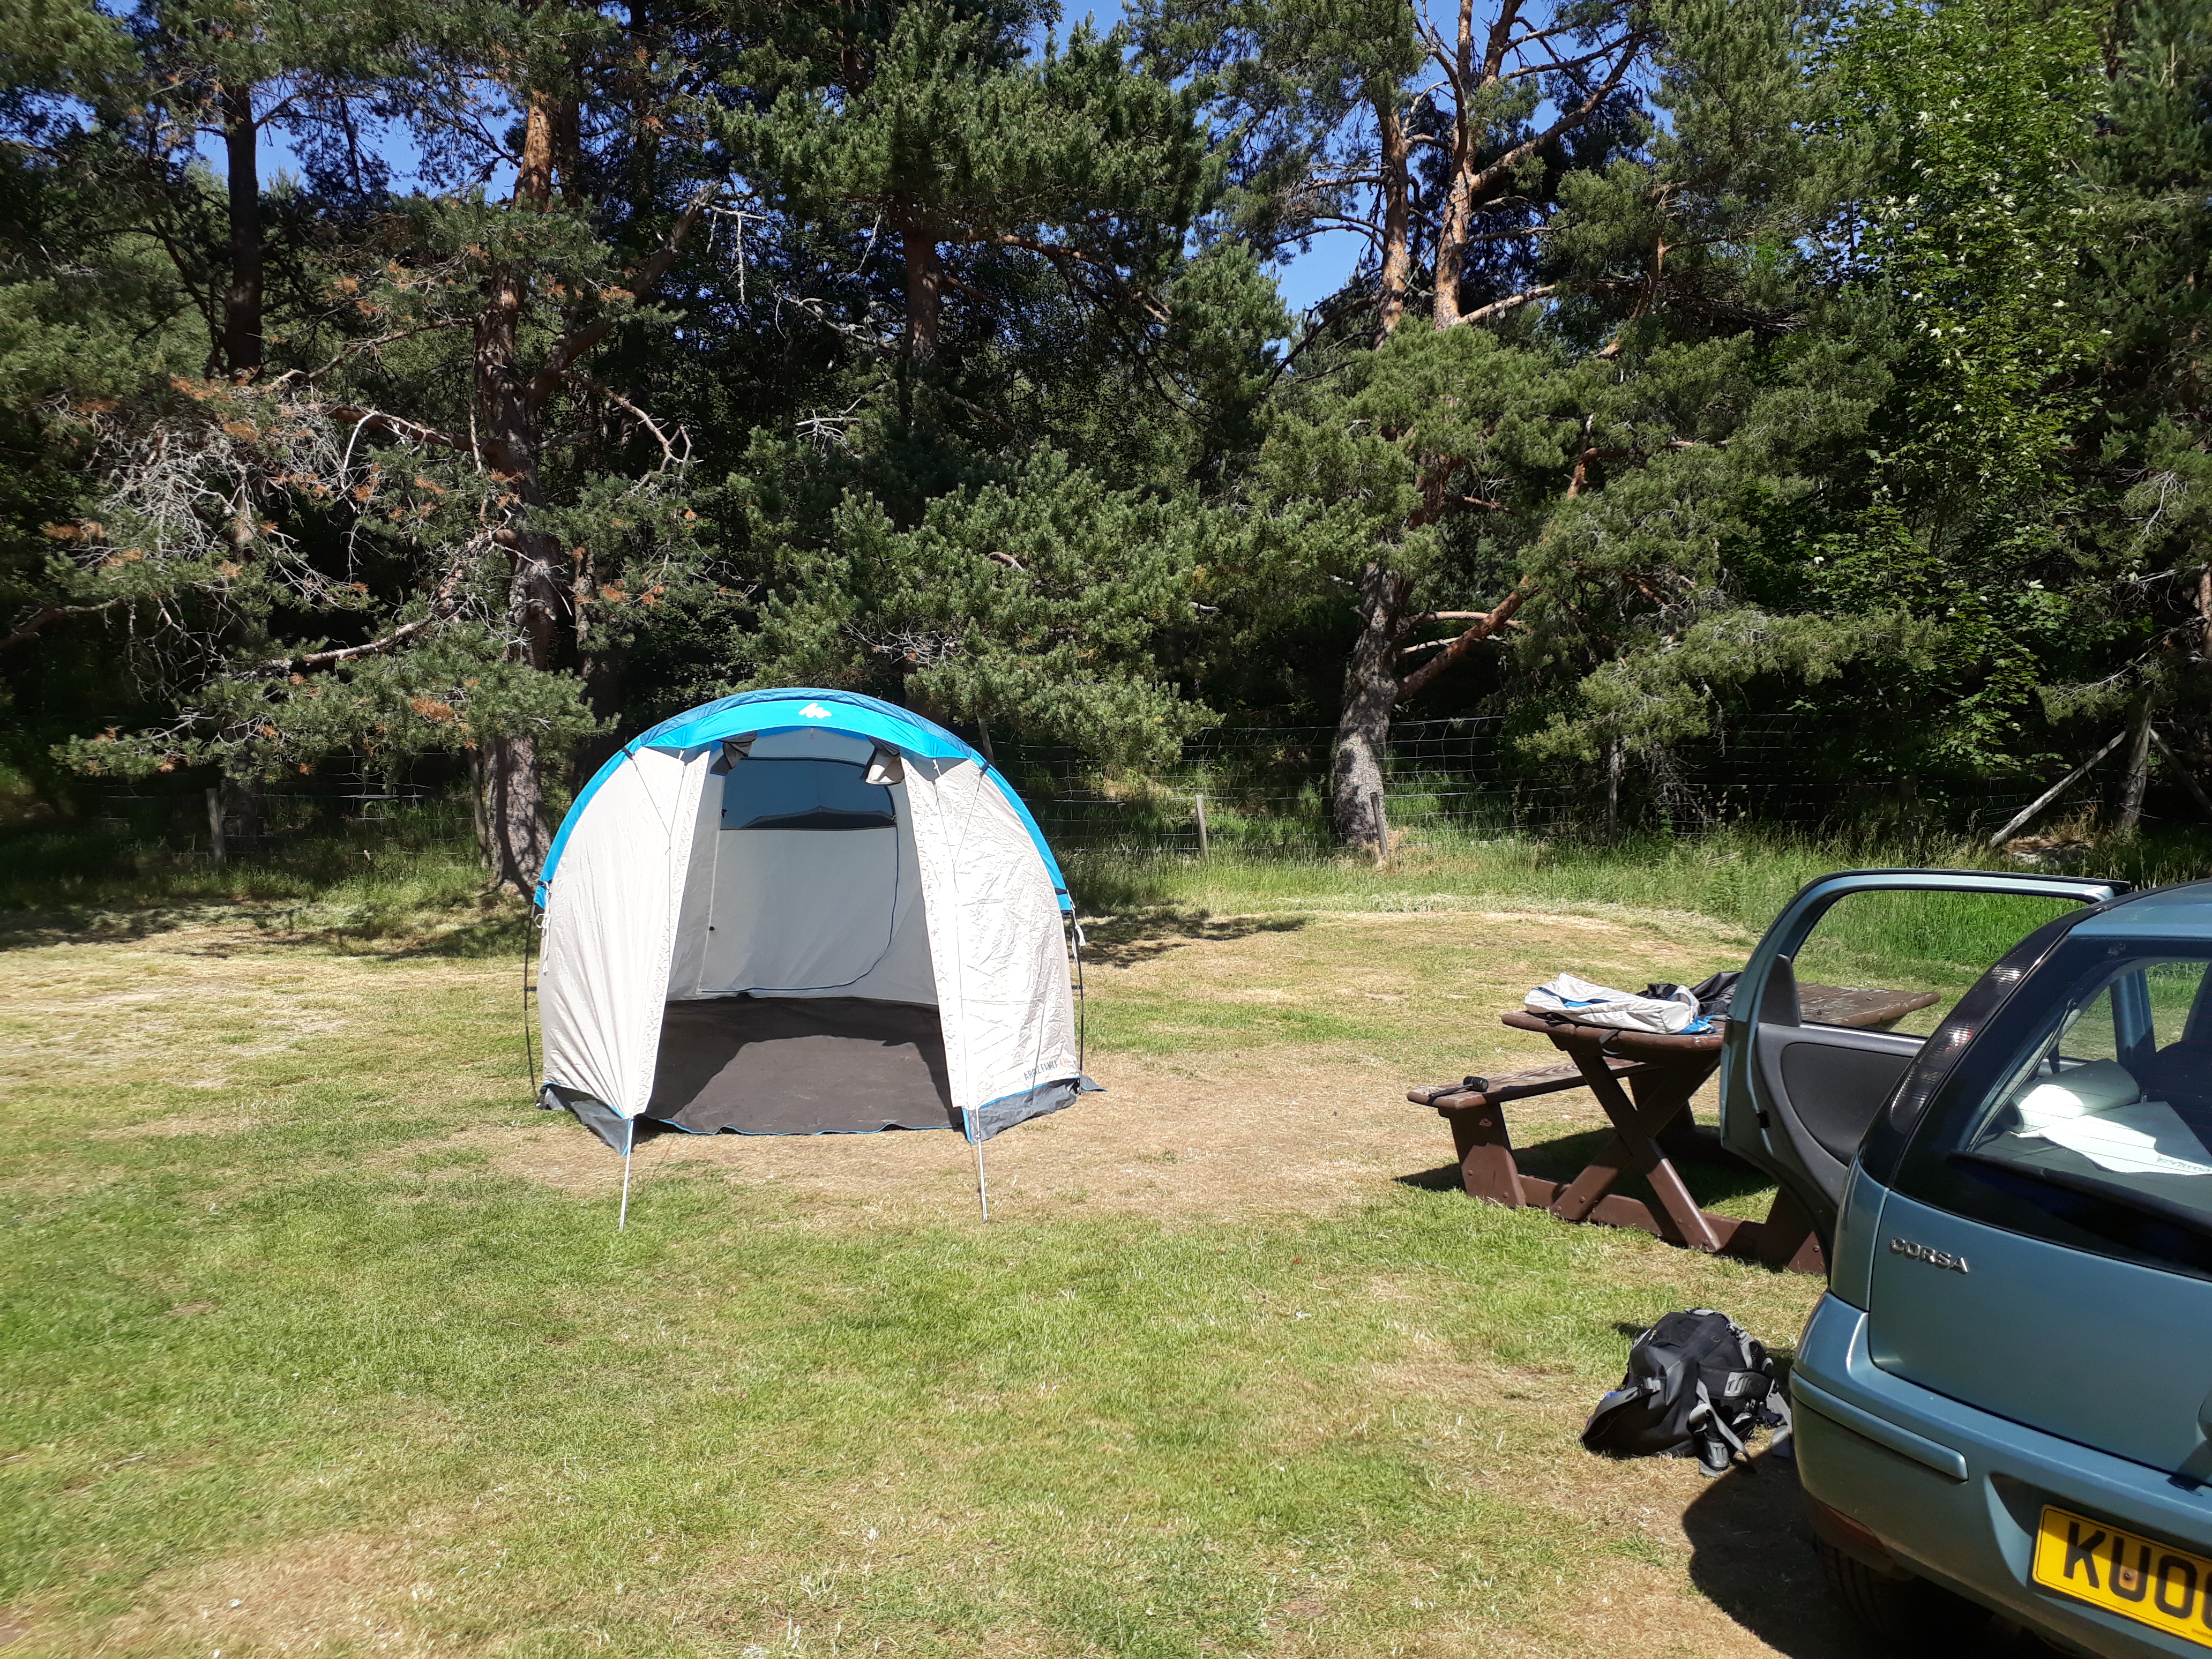 The family tent on campsite Loch Morlich, fully opened for ventilation.